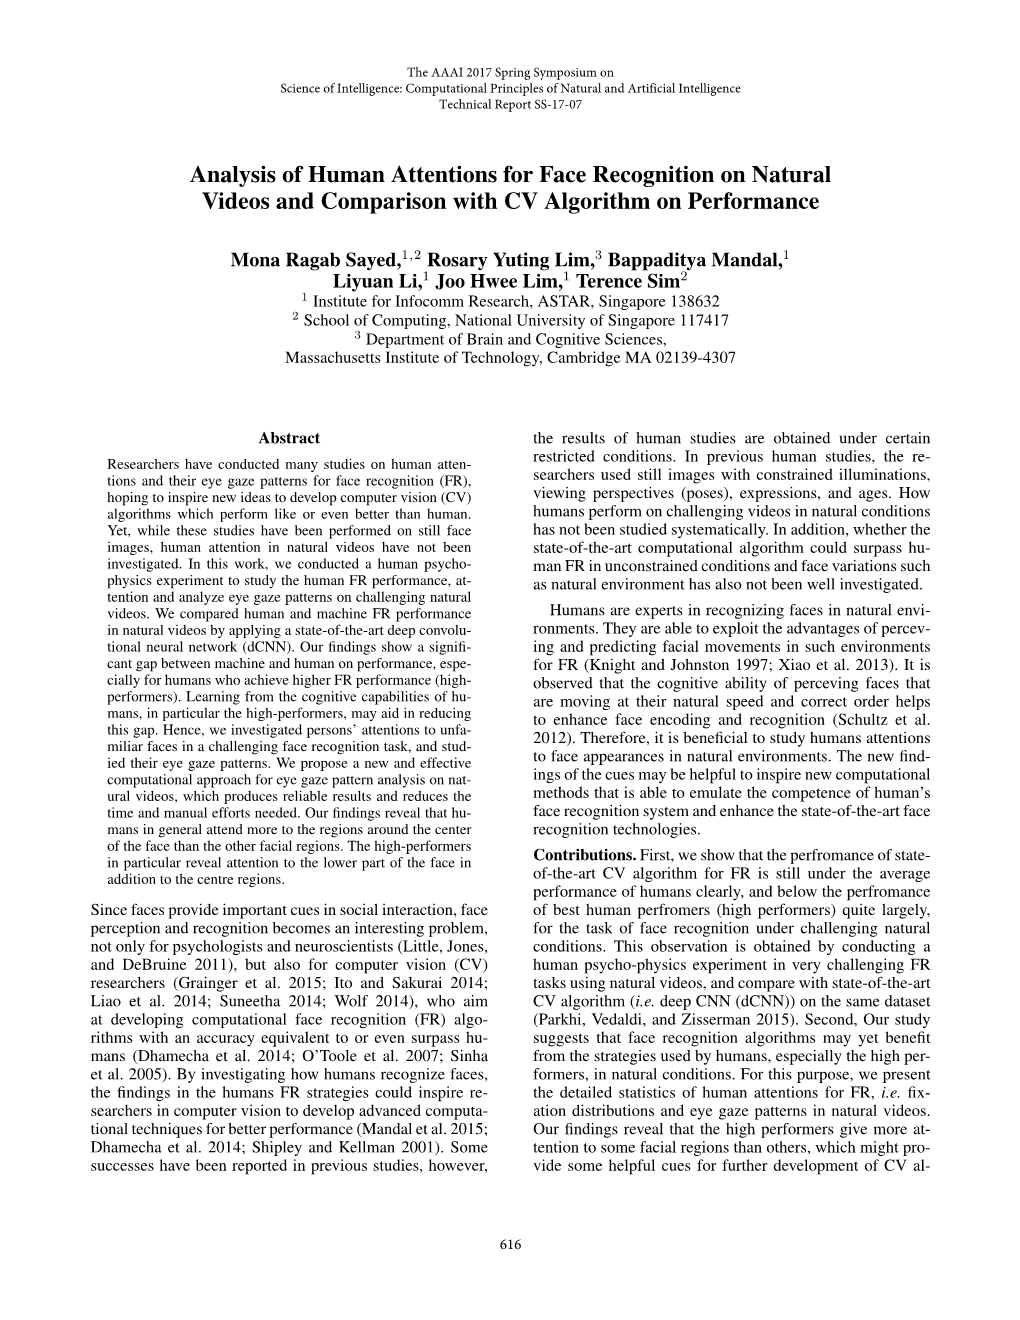 Analysis of Human Attentions for Face Recognition on Natural Videos and Comparison with CV Algorithm on Performance